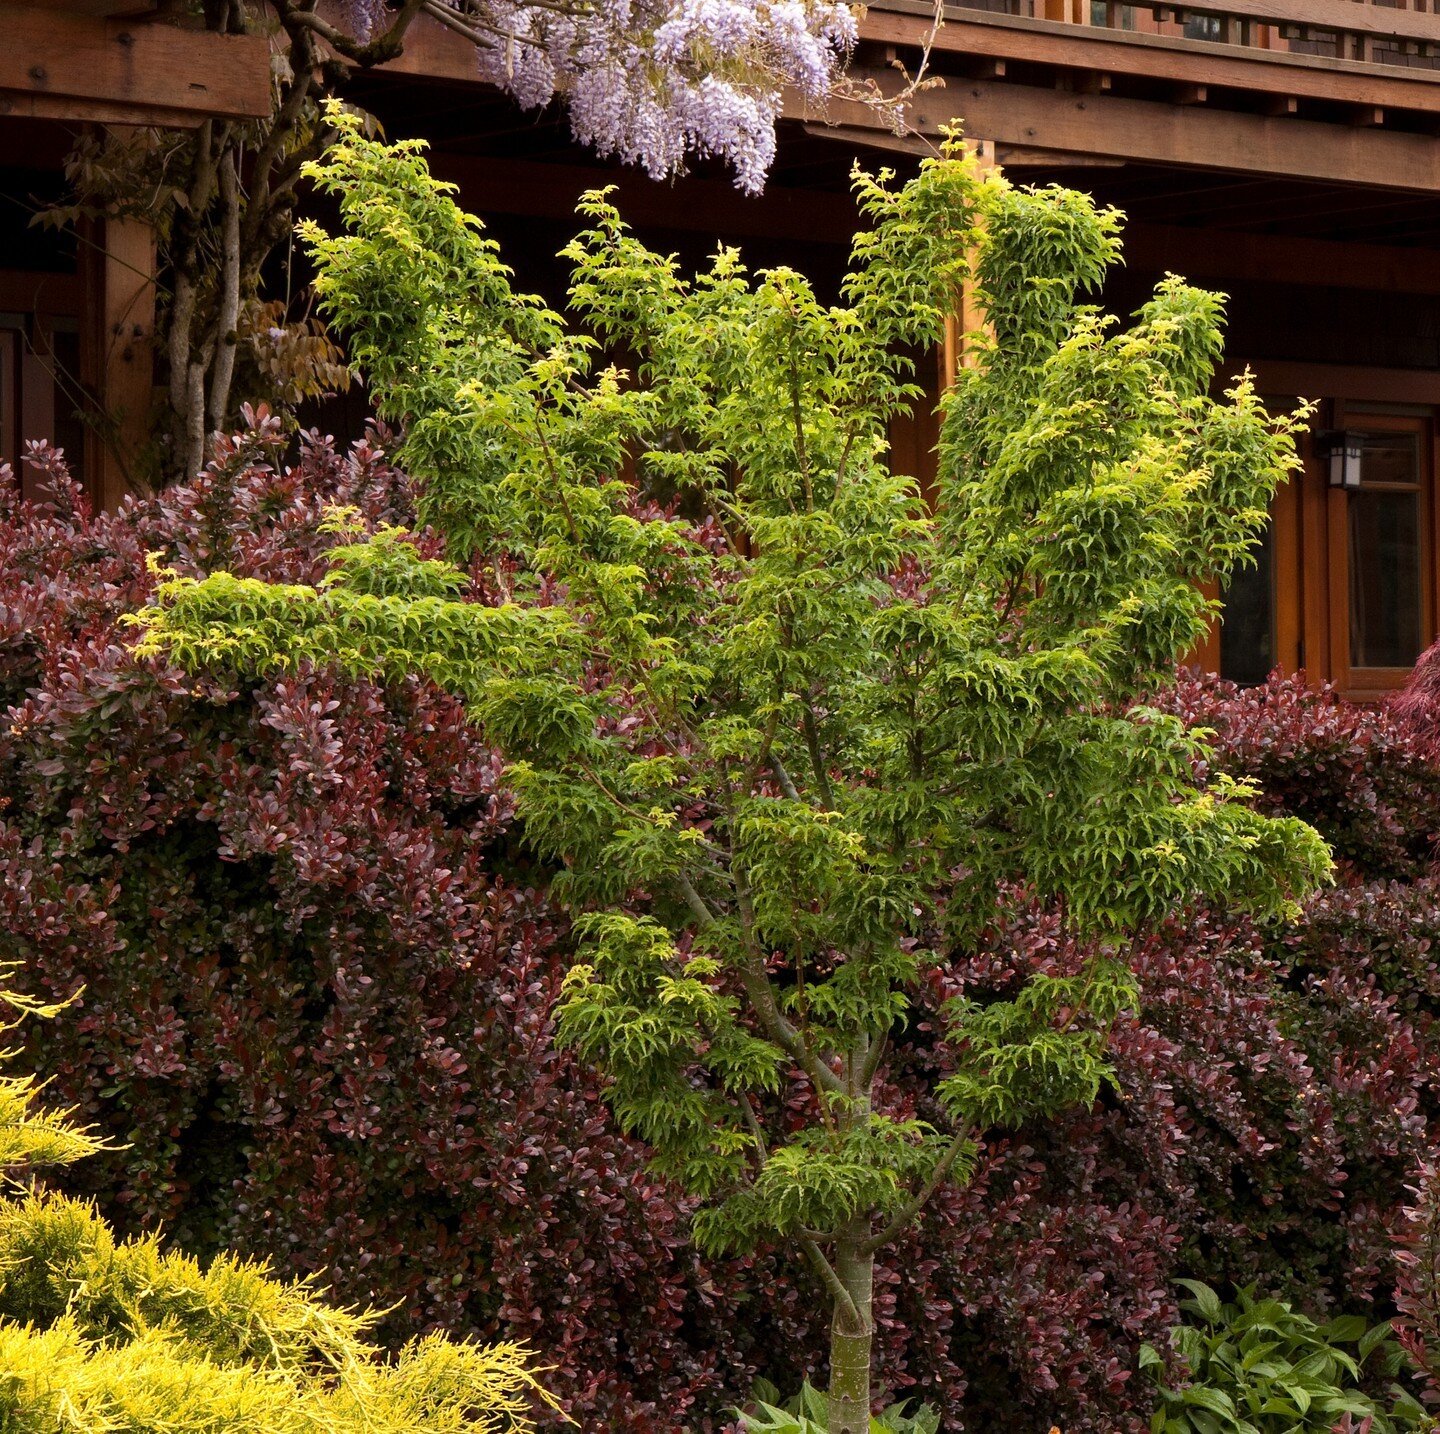 PSA to our fellow tree lovers: #ArborDay is coming up on April 26th! What will you do to celebrate? (You know our suggestion: #PlantATree!)

Shown: Shishigashira Japanese Maple from @MonroviaPlants.